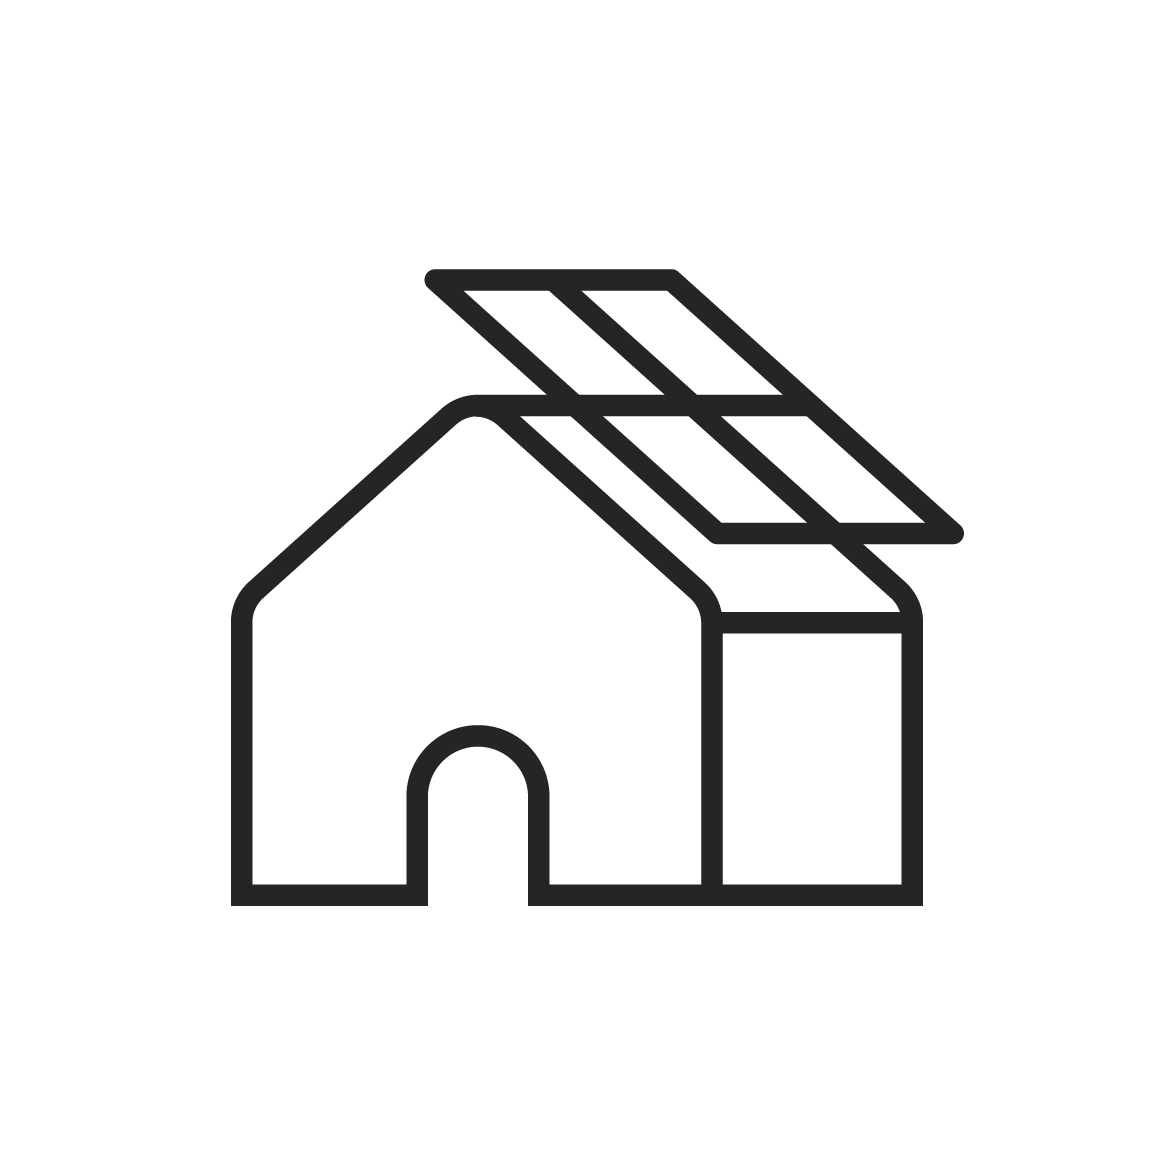 icon of solar panels on a house